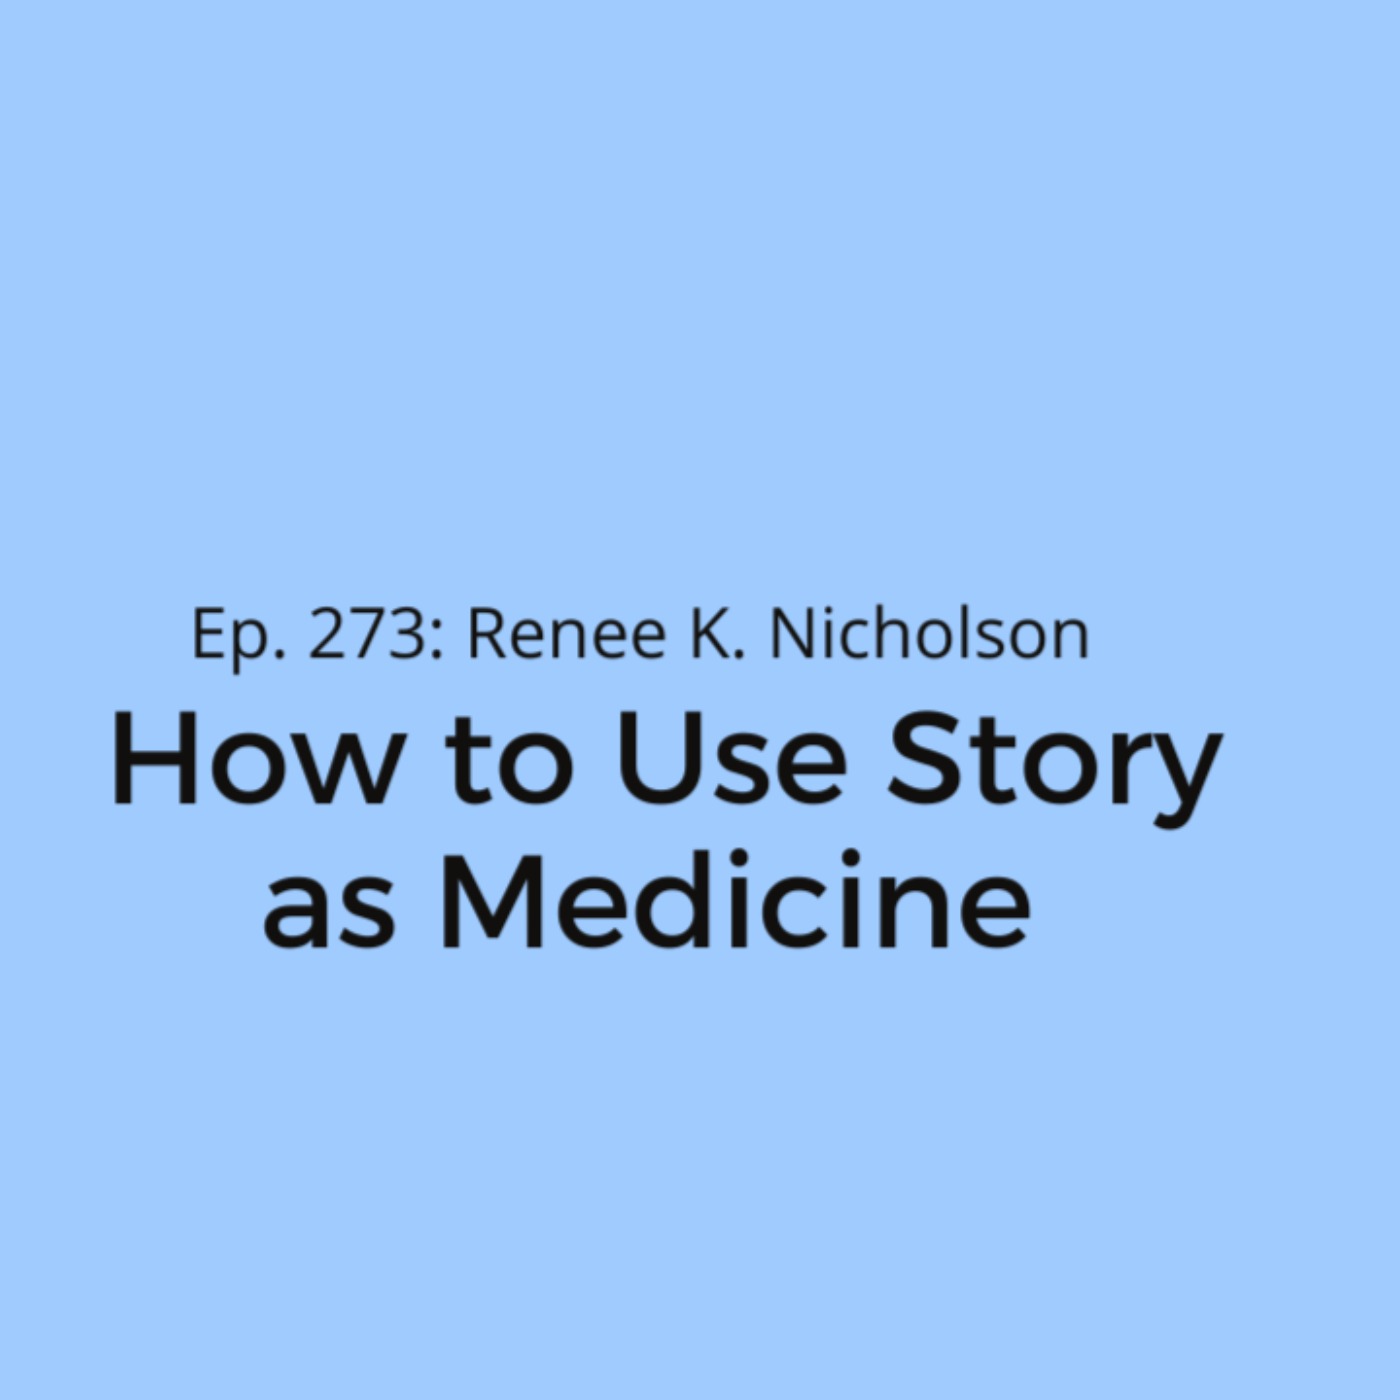 Ep. 273: Renee K. Nicholson on How to Use Story as Medicine